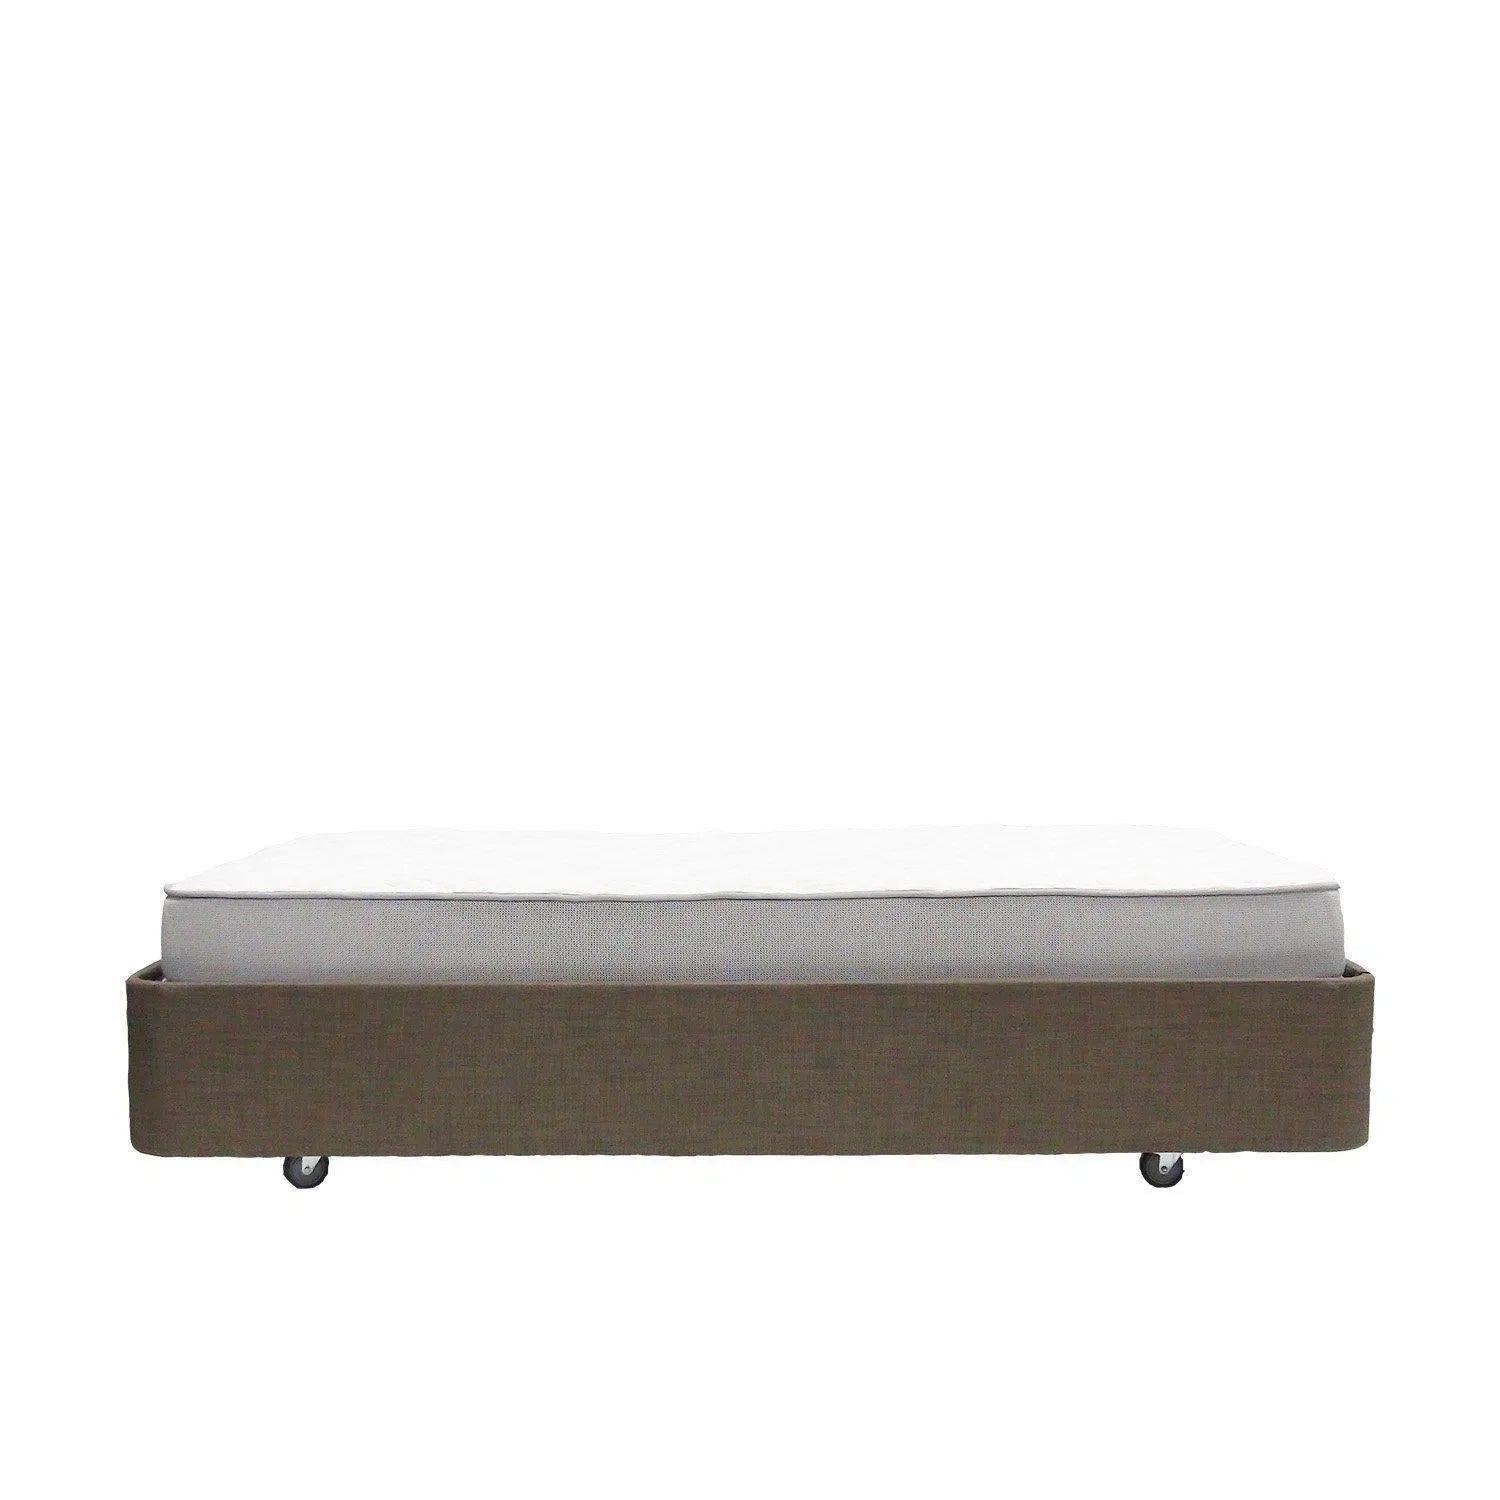 1000-360 Head Foot Adjustable Bed with Washable Cover and Standard Mattress-Sleep Doctor